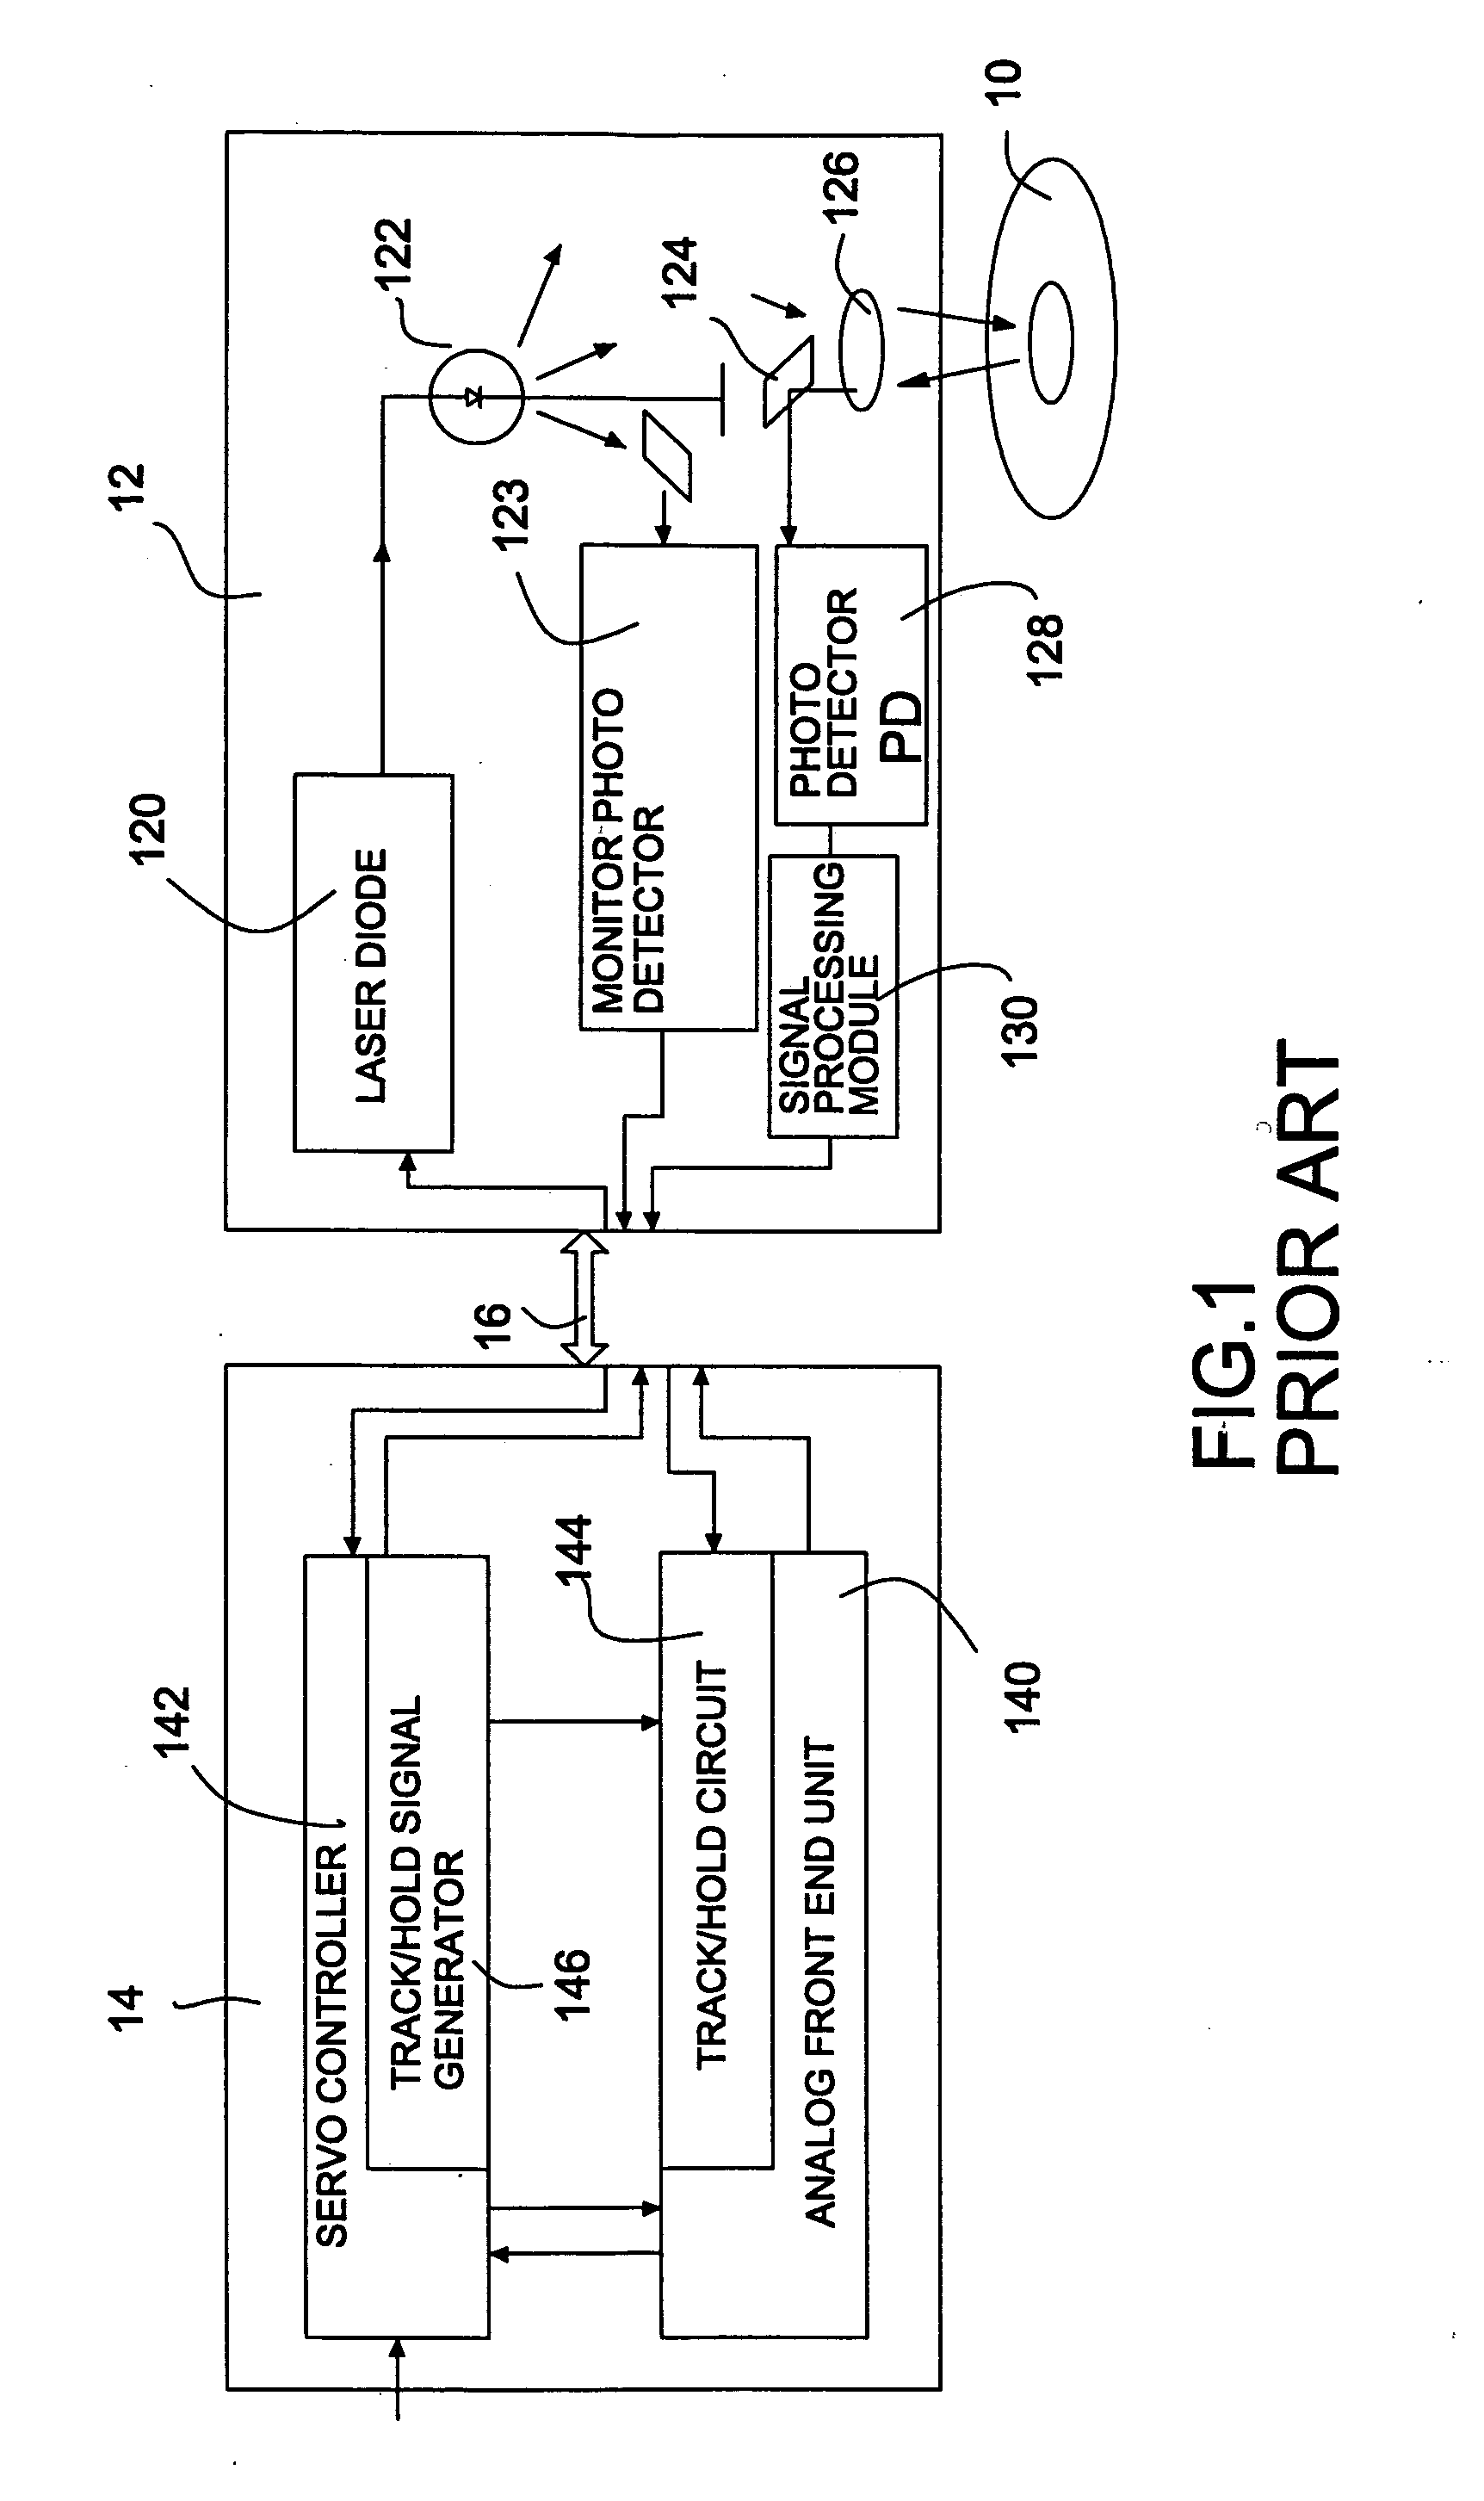 Signal processing method and optical pickup capable of reducing signal distortion